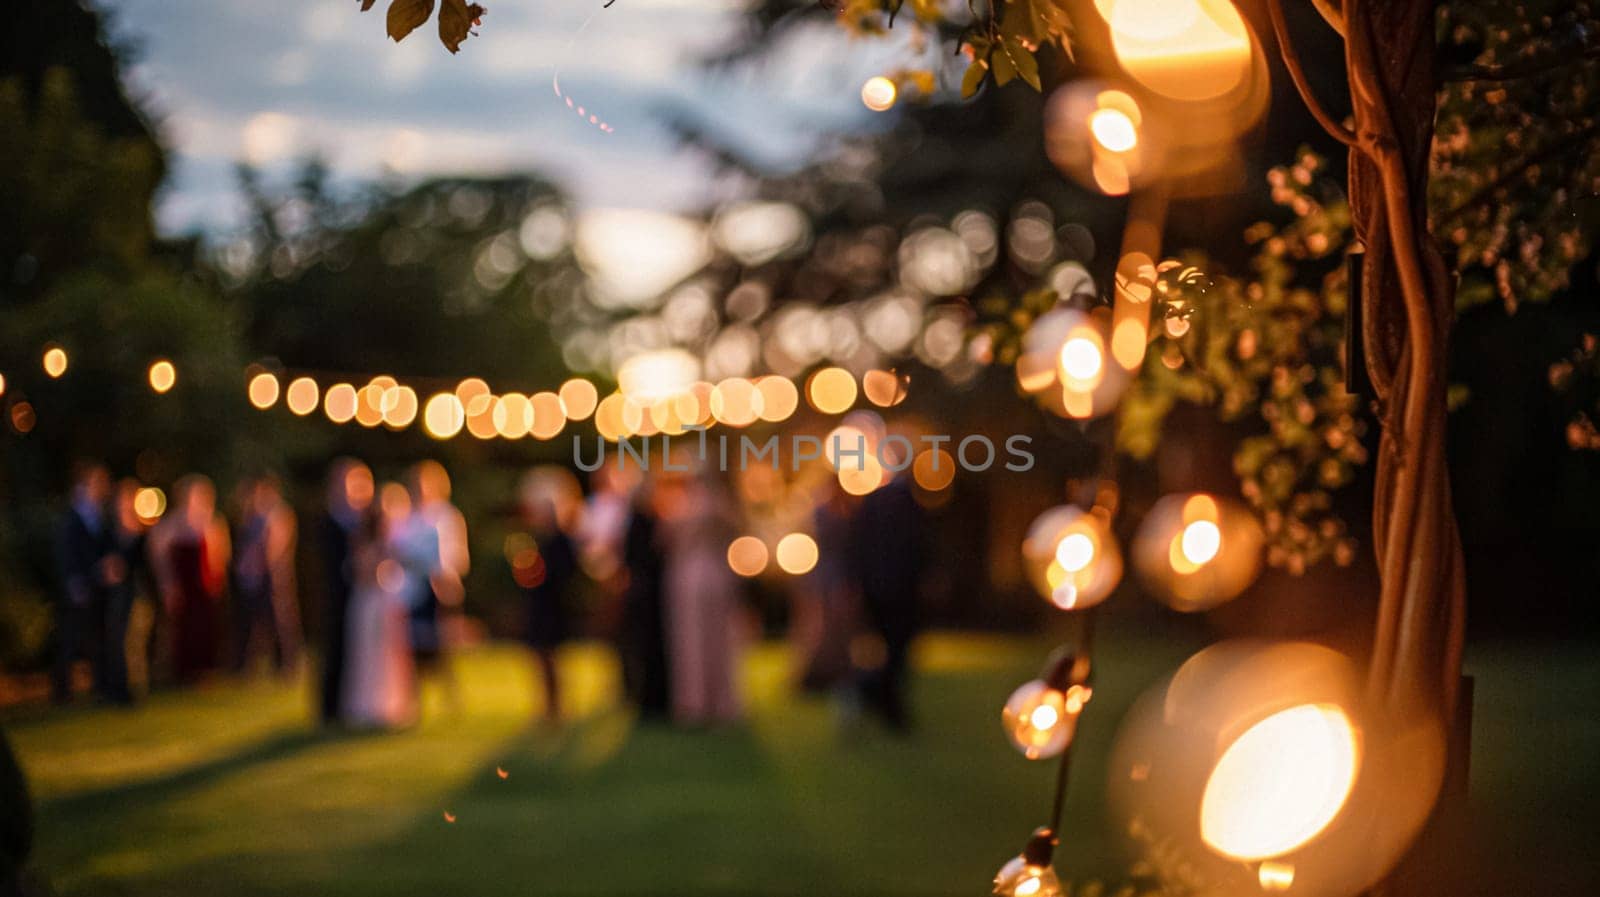 Outdoor wedding reception, warm glow of the lights creates a magical atmosphere as guests gather, the background is blurred, joyful ambiance of the celebration, romantic and festive evening wedding celebration by Anneleven